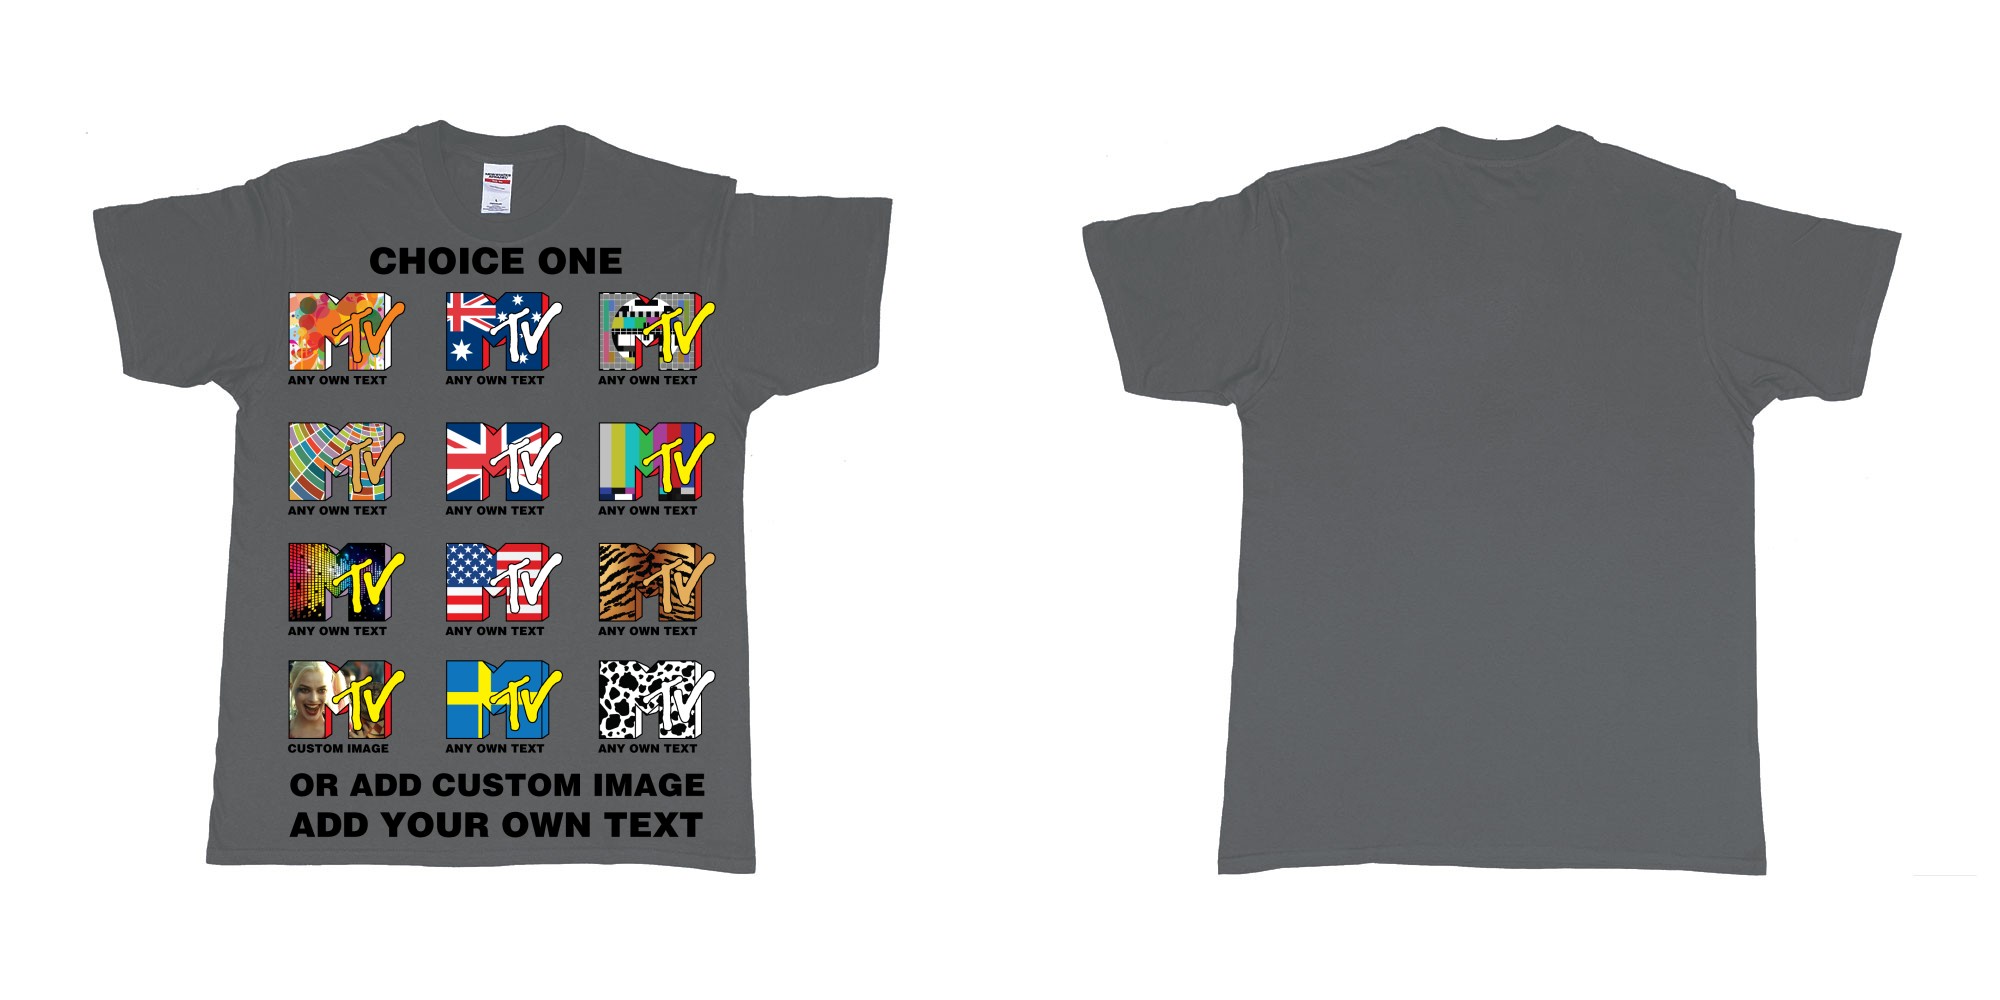 Custom tshirt design mtv logo choice any background text print in fabric color charcoal choice your own text made in Bali by The Pirate Way